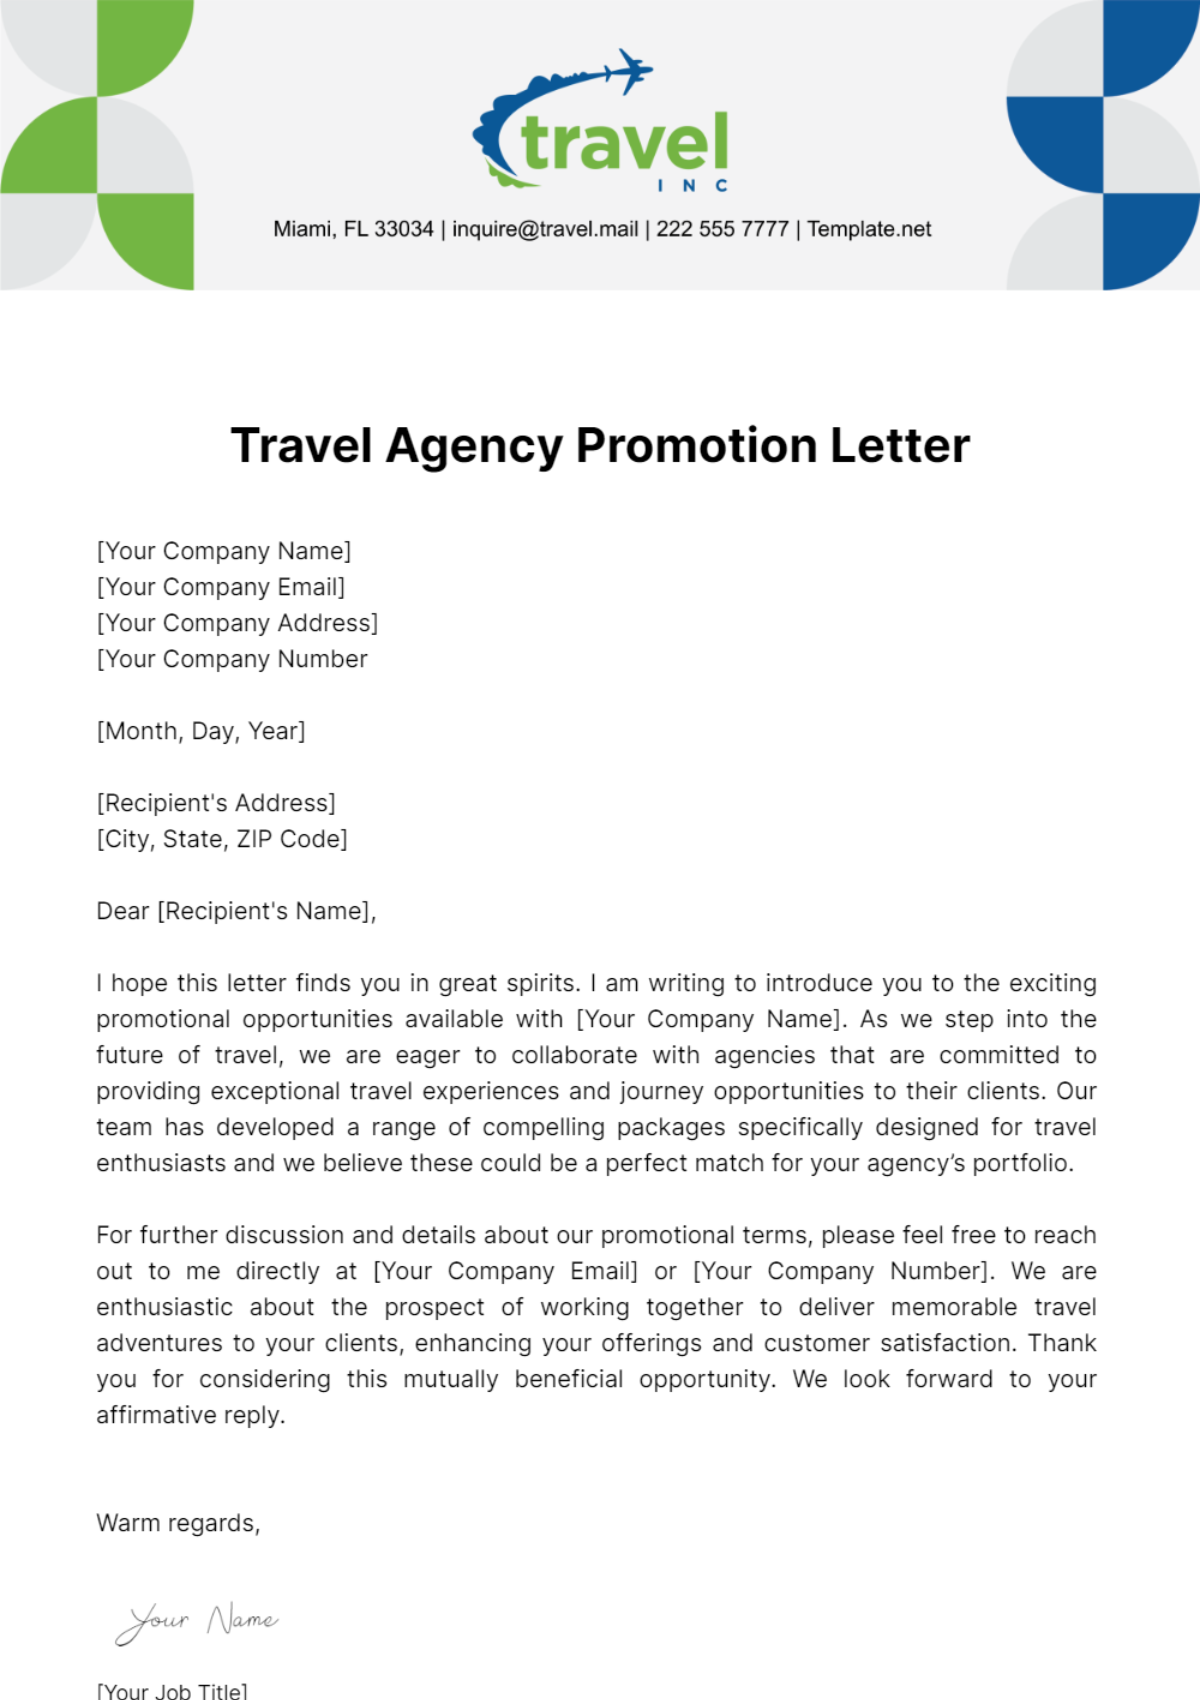 Travel Agency Promotion Letter Template